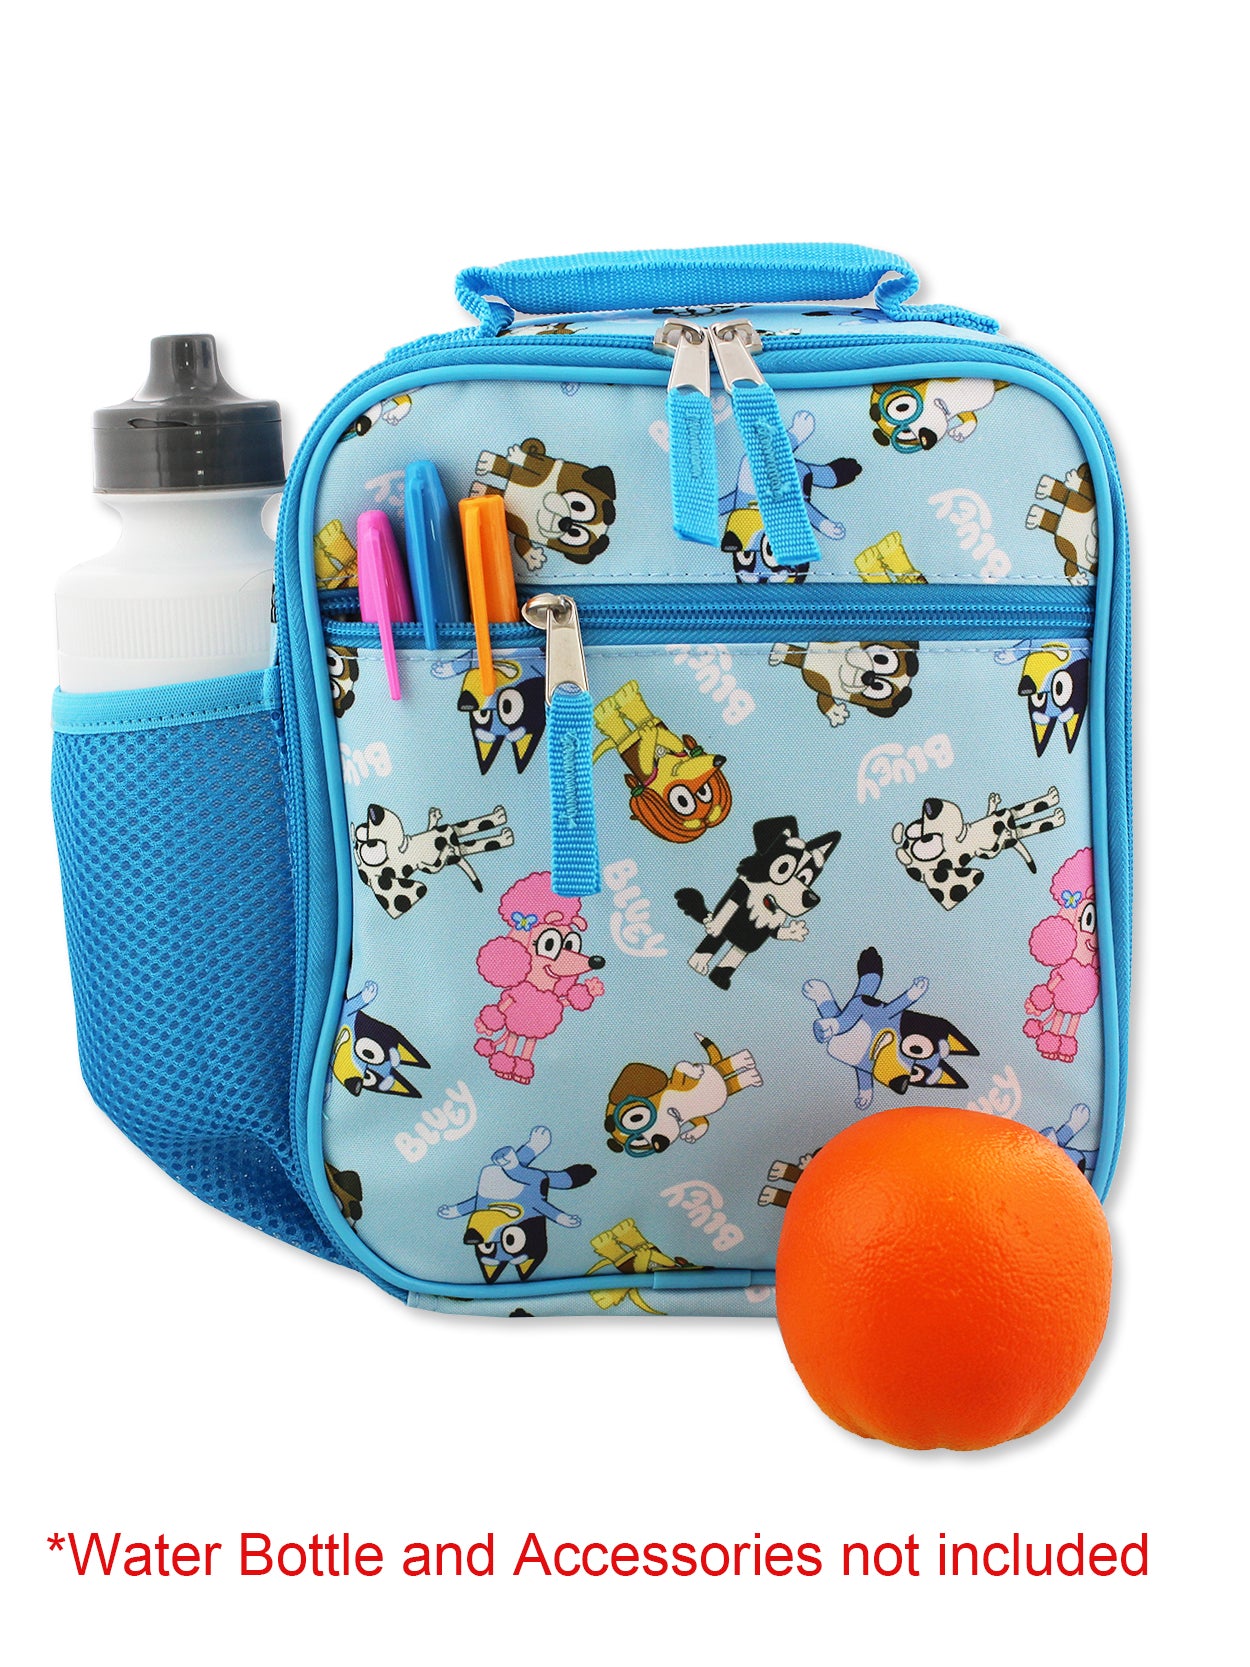 Accessory Innovations Bluey Kids Lunch Box Bluey and Bingo Raised Character Insulated Lunch Bag Tote for Hot and Cold Food, Drinks, and Snacks